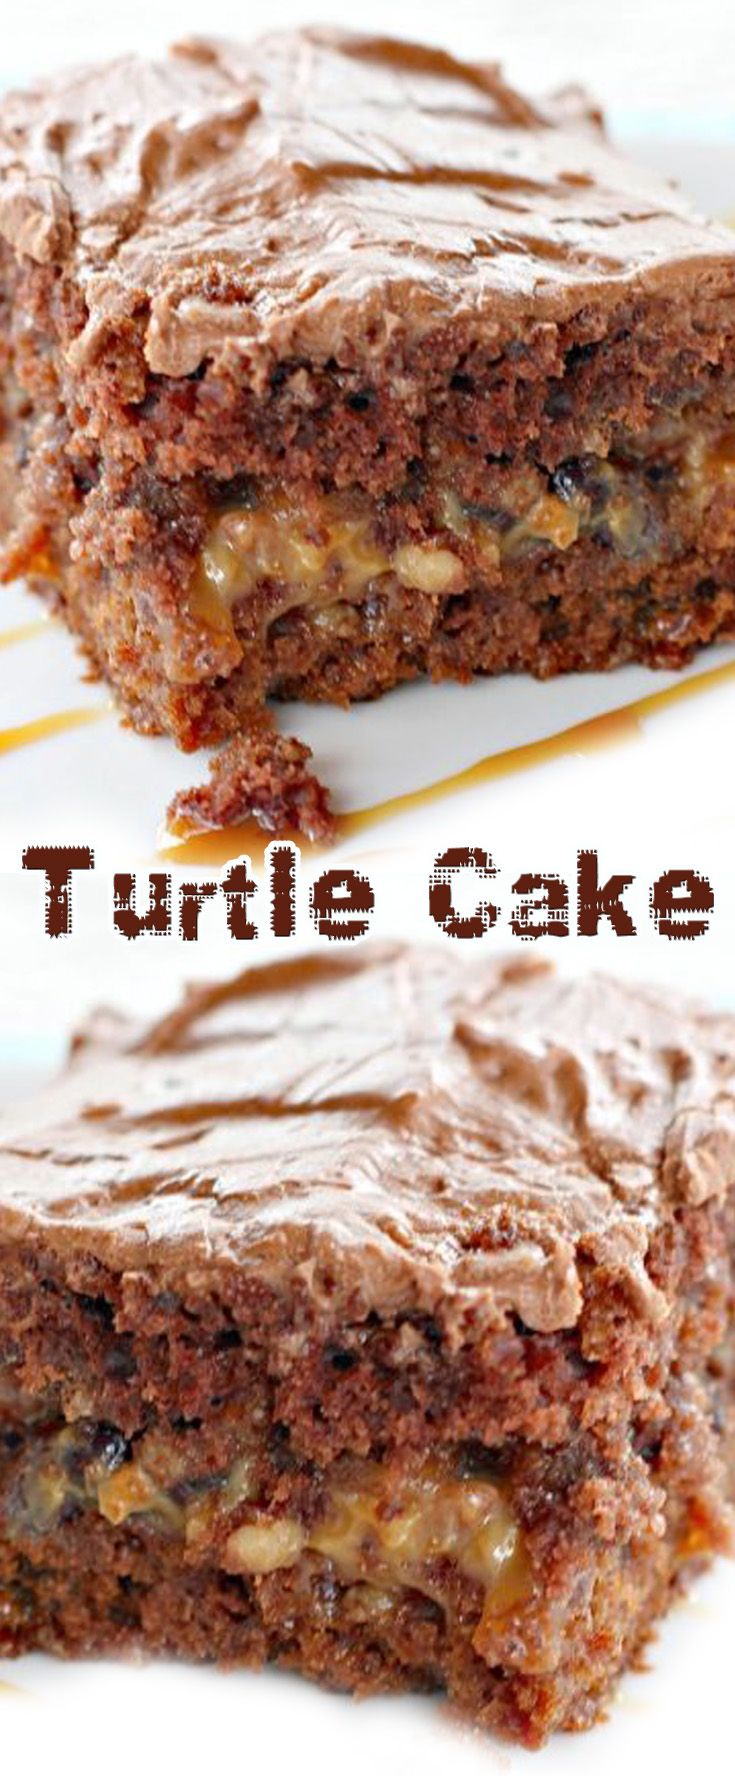 Easy Turtle Cake - Plowing Through Life